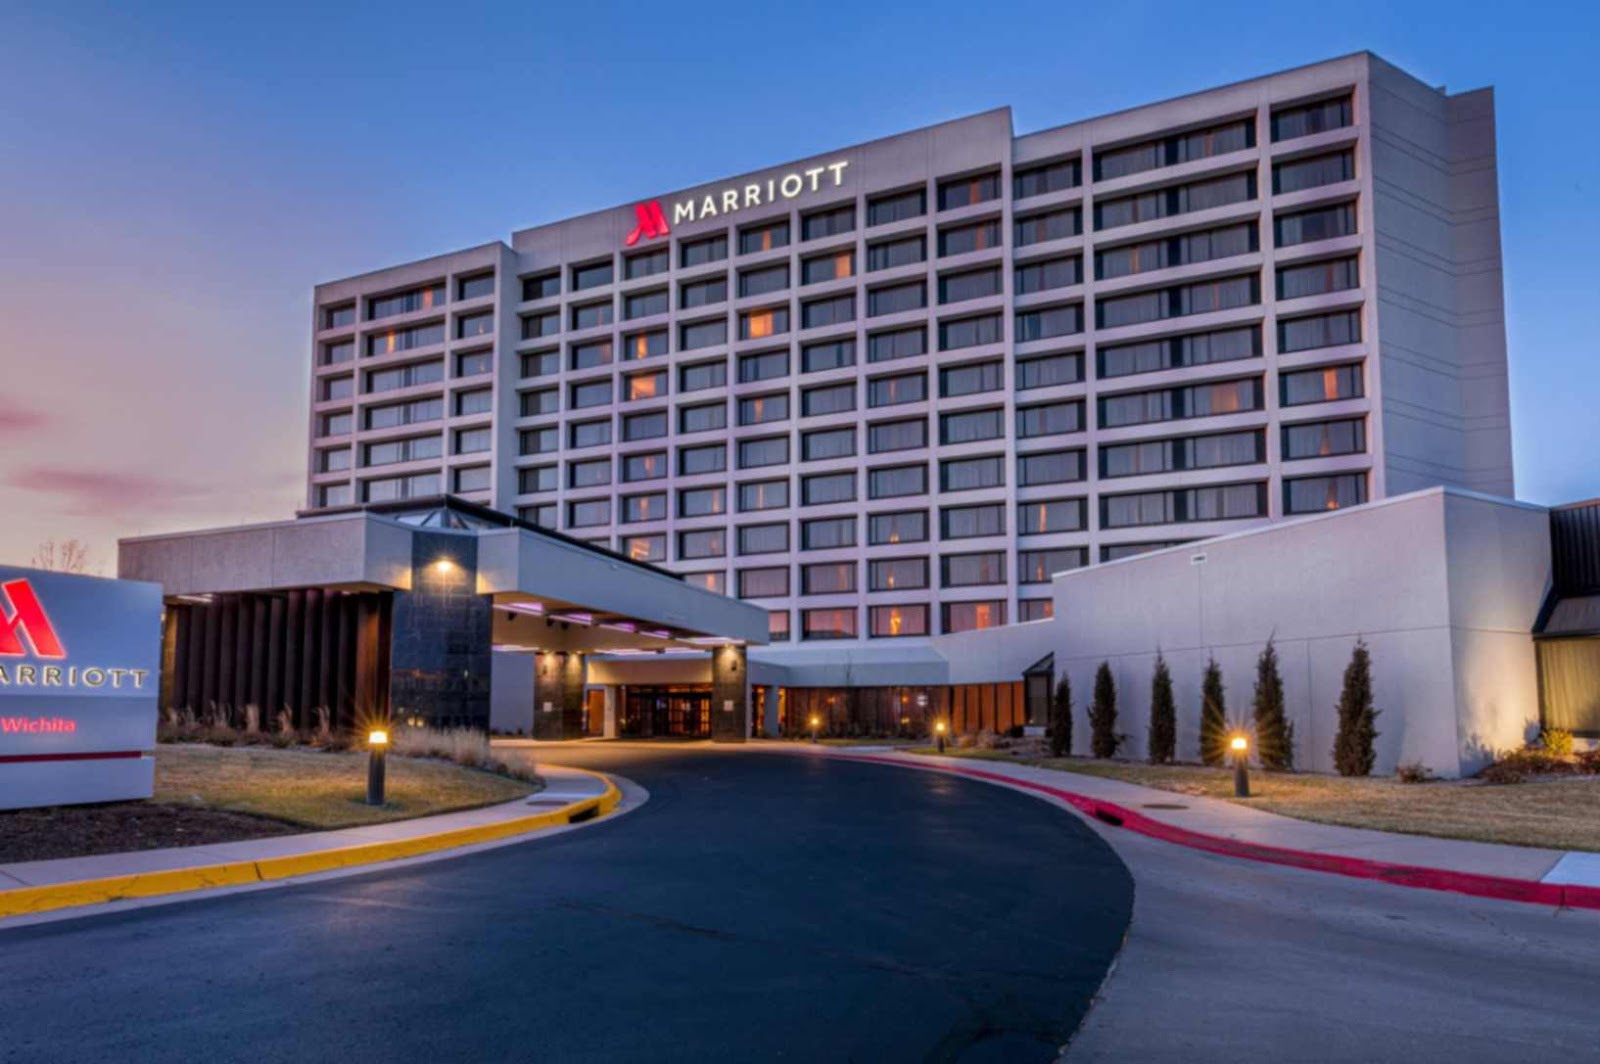 Marriott: hotels that work with influencers